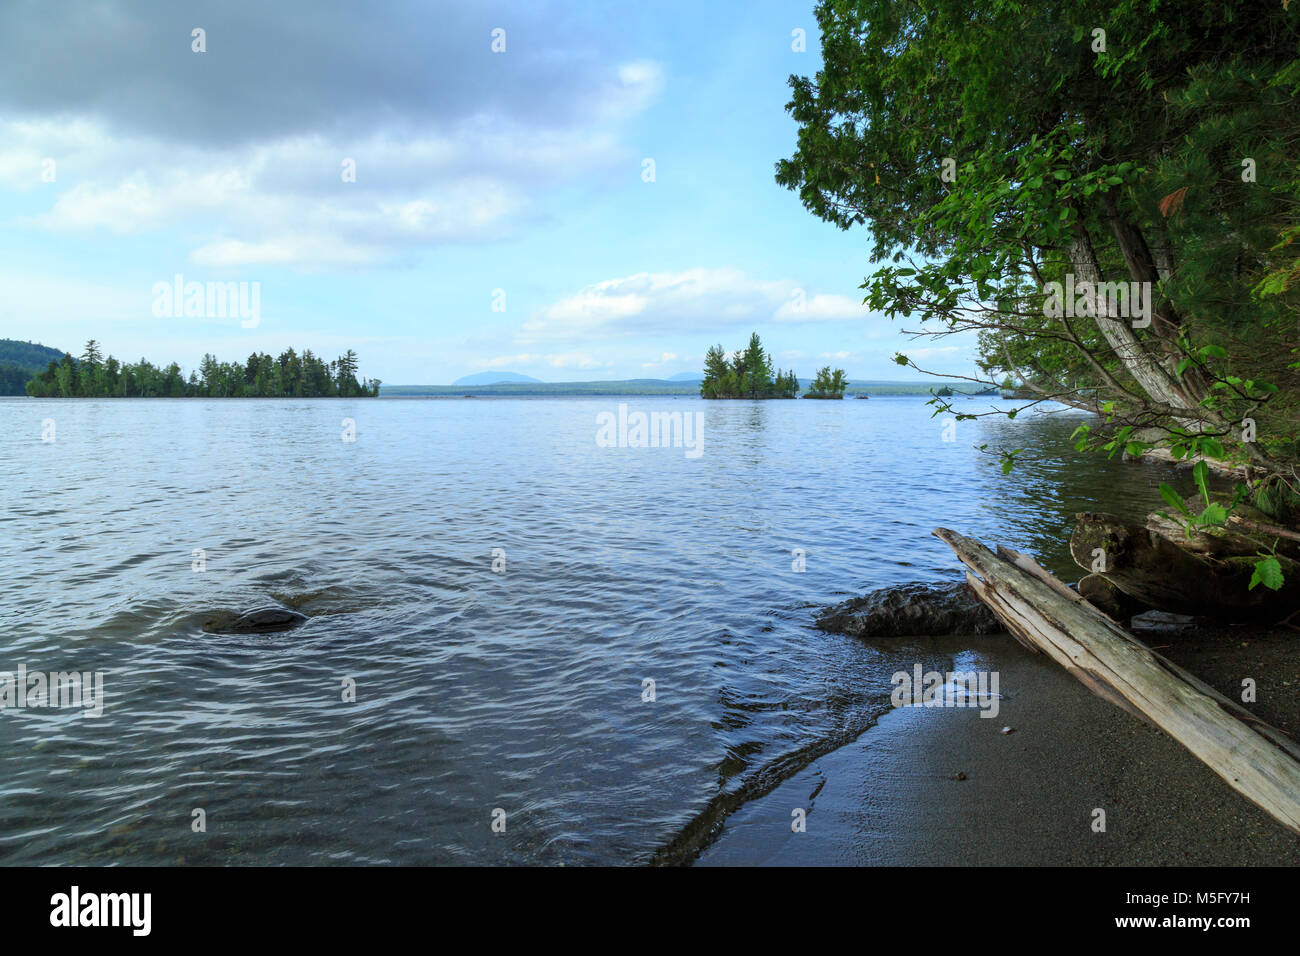 Küste im Sommer, Lily Bay State Park, an Moosehead Lake, Greenville, Maine Stockfoto